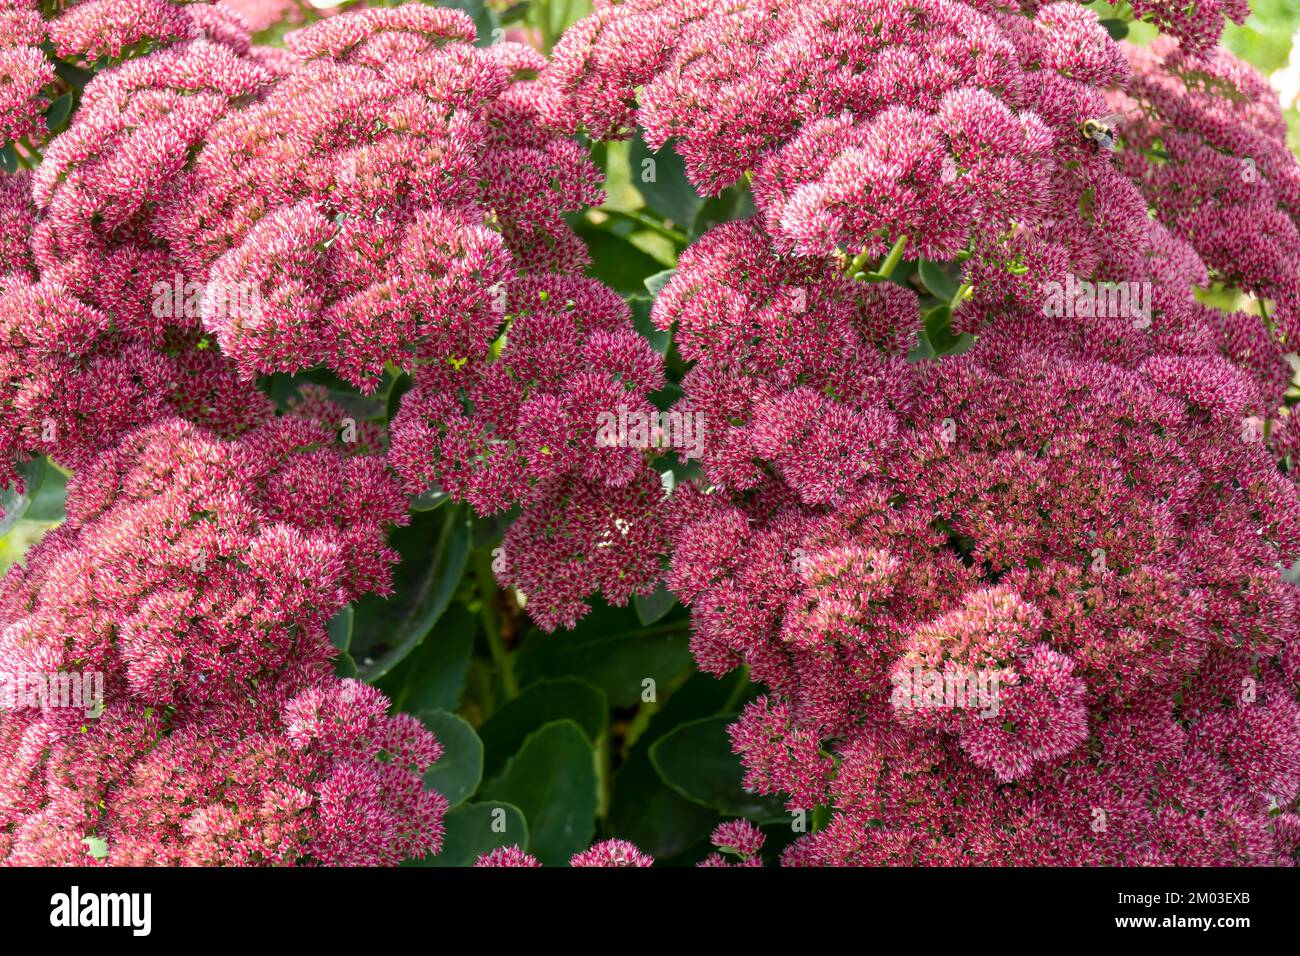 Sedum Autumn Joy, also known as stonecrop, is an easy care drought tolerant perennial which blooms in the late summer garden. Stock Photo